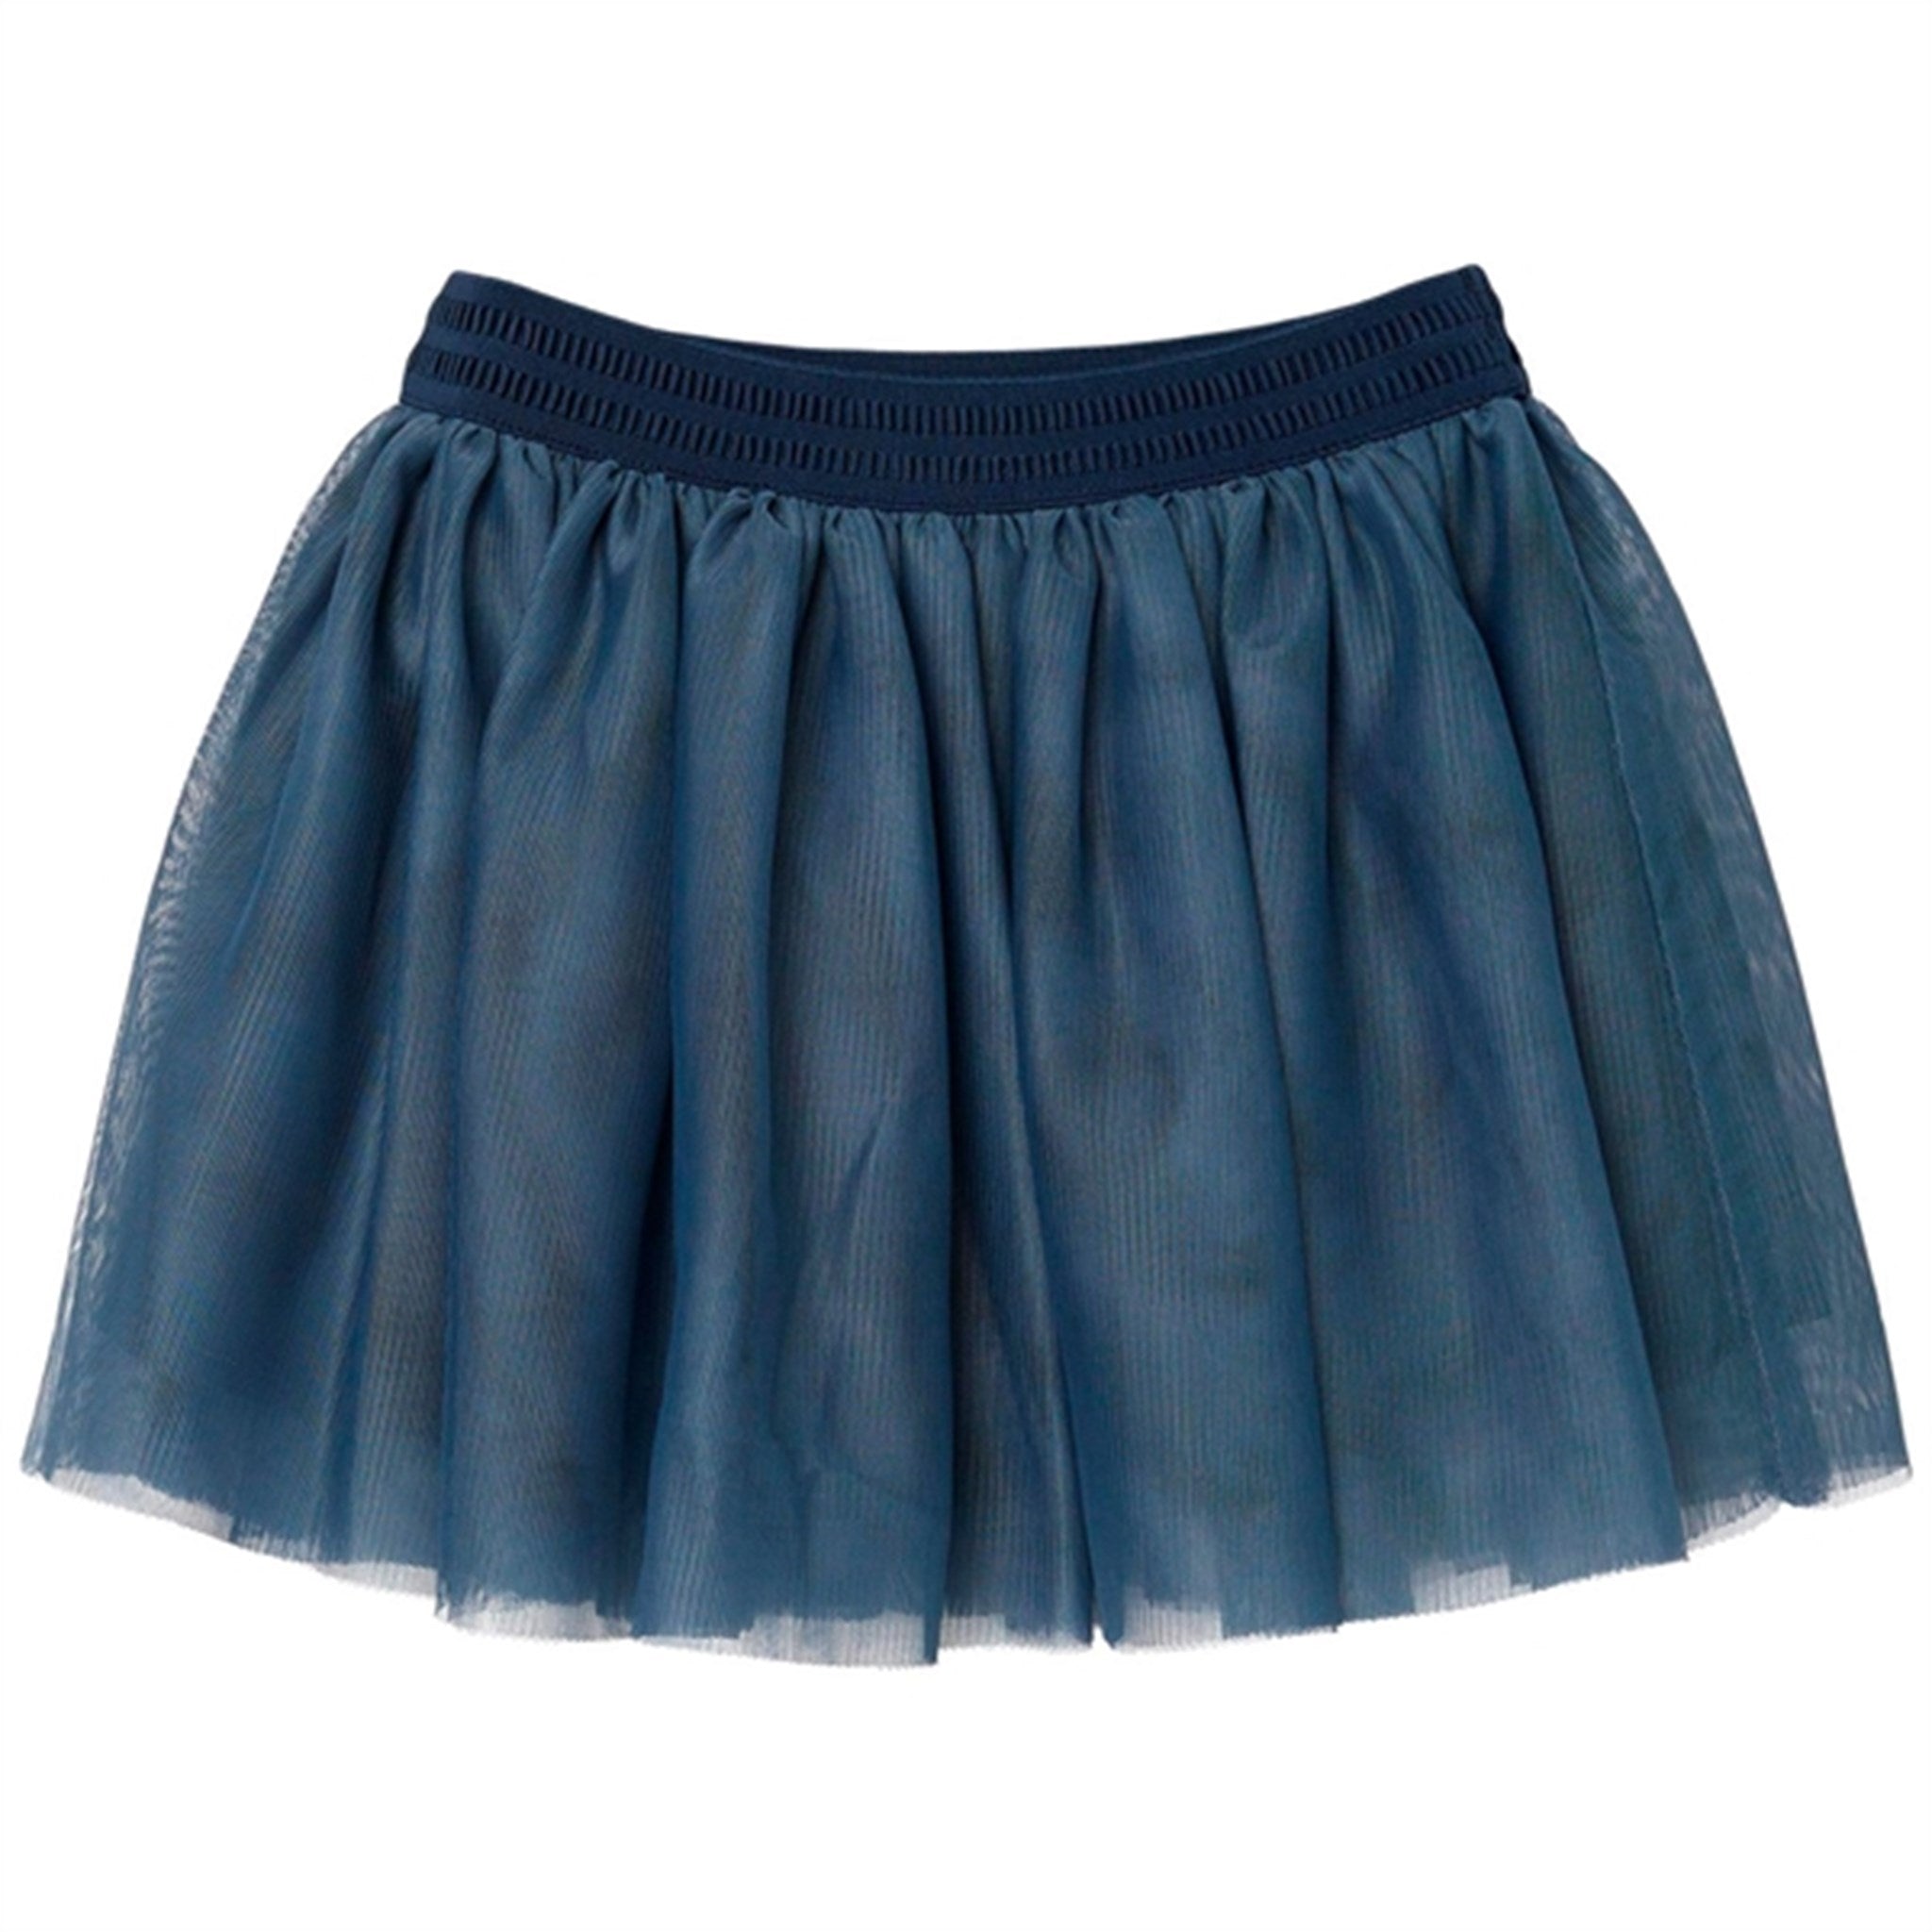 Name it China Blue Nutulle Skirt NOOS